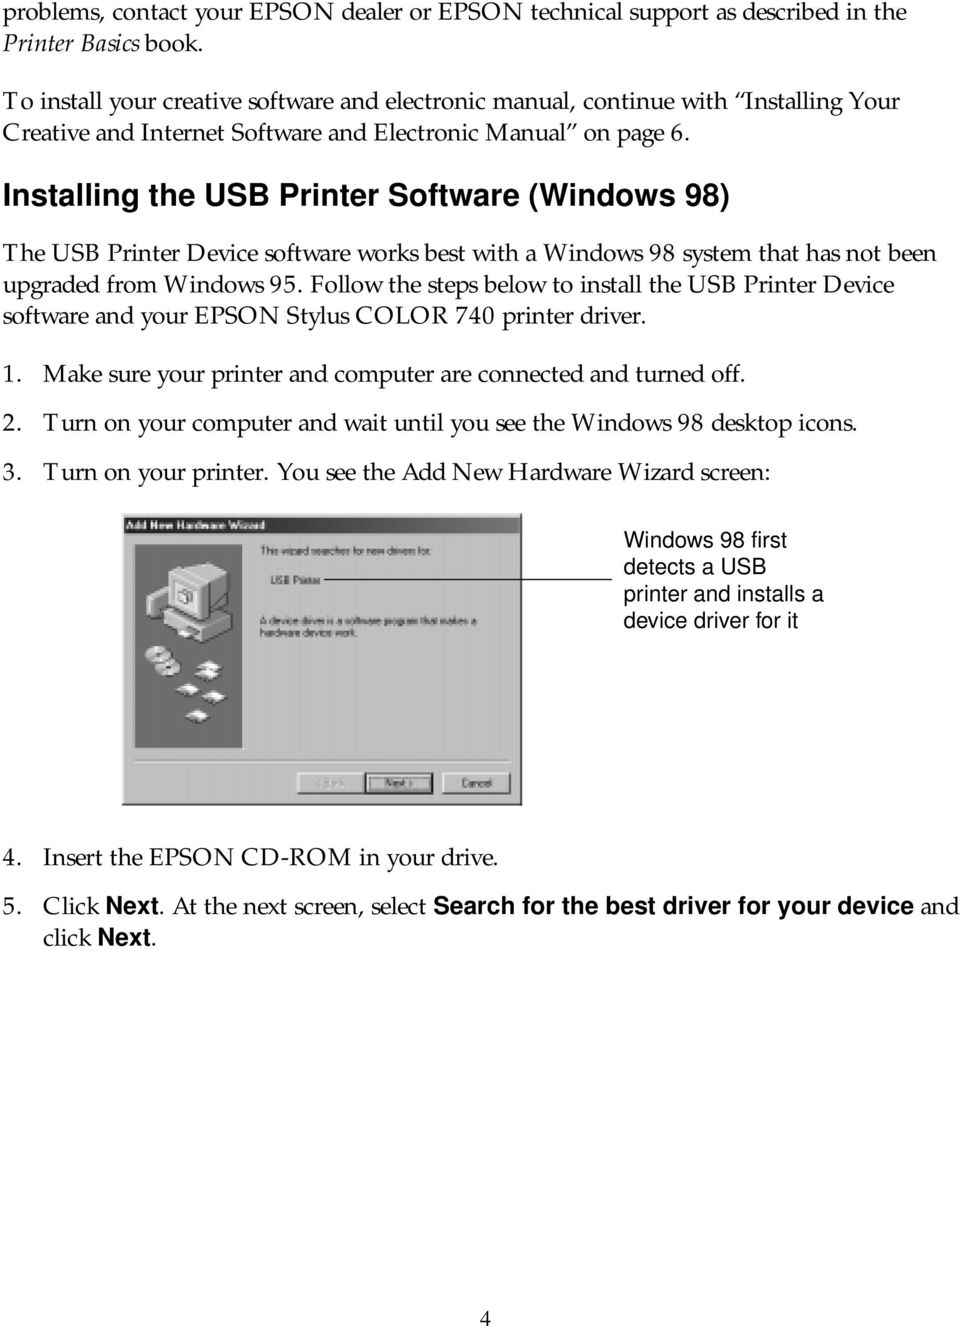 Installing the USB Printer Software (Windows 98) The USB Printer Device software works best with a Windows 98 system that has not been upgraded from Windows 95.